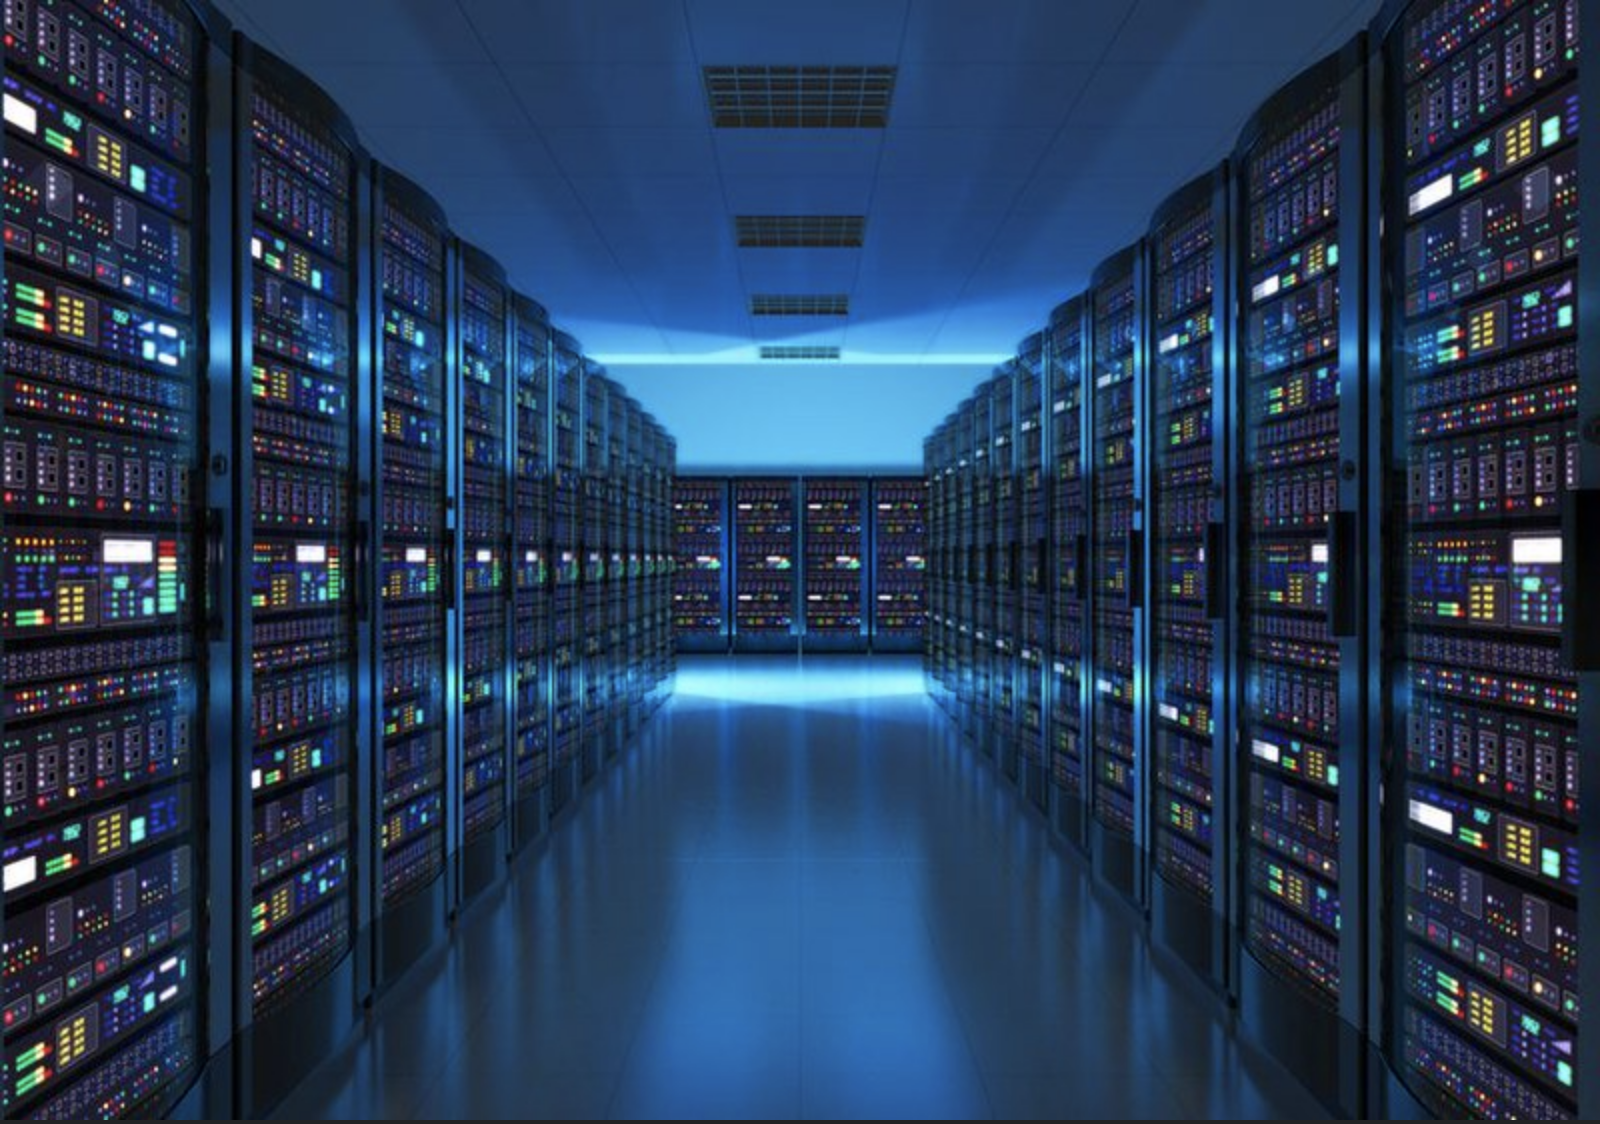 An image of a dim room in the middle of a server farm aisle.